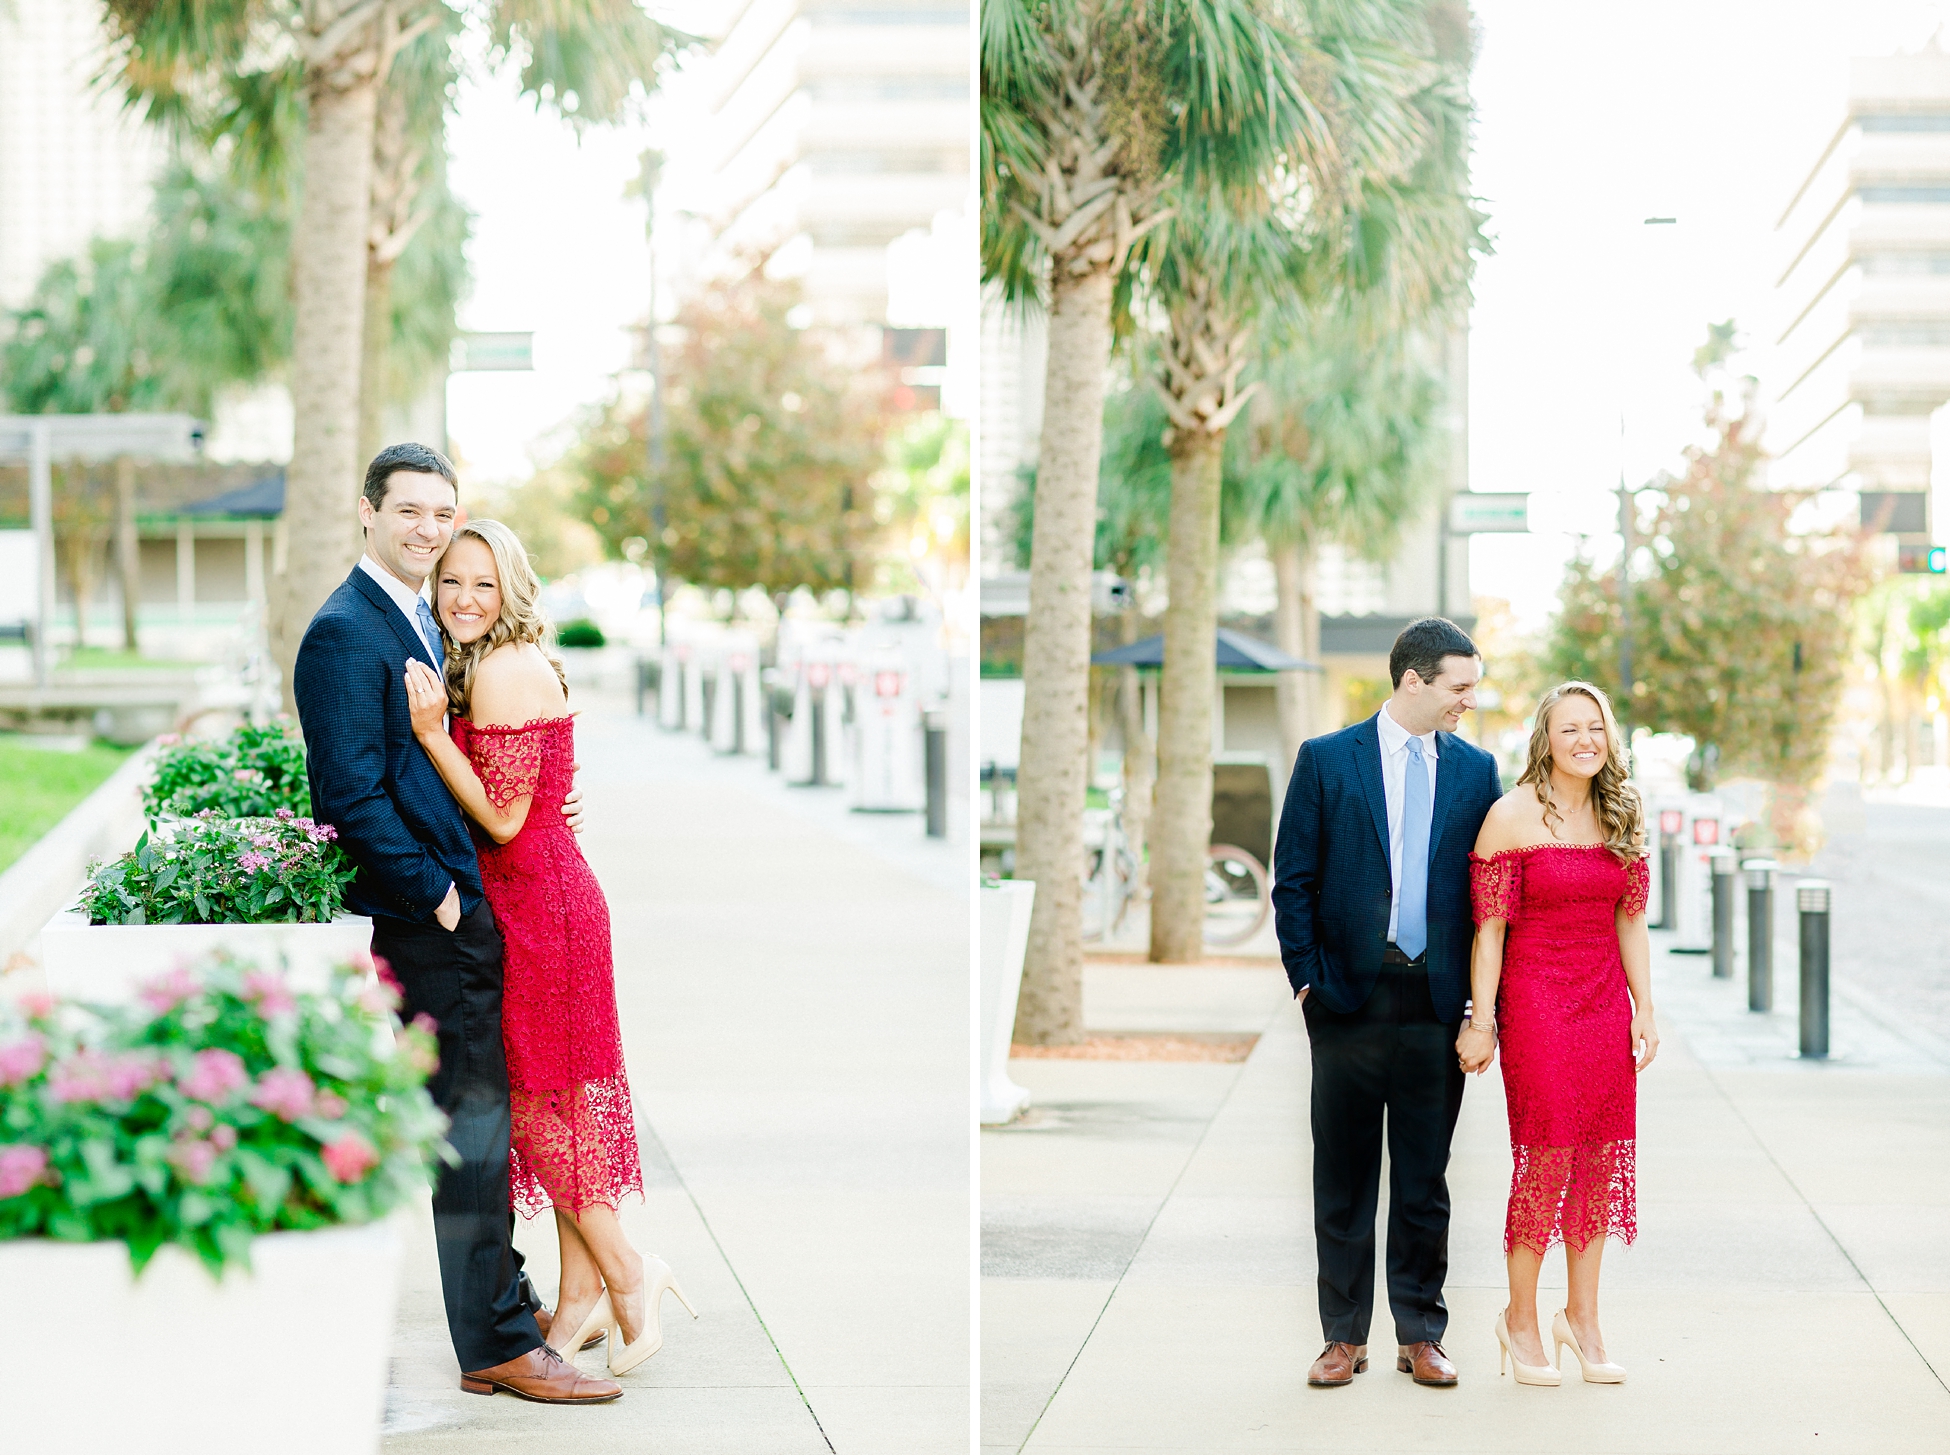 Downtown Tampa Engagement | © Ailyn La Torre Photography 2019